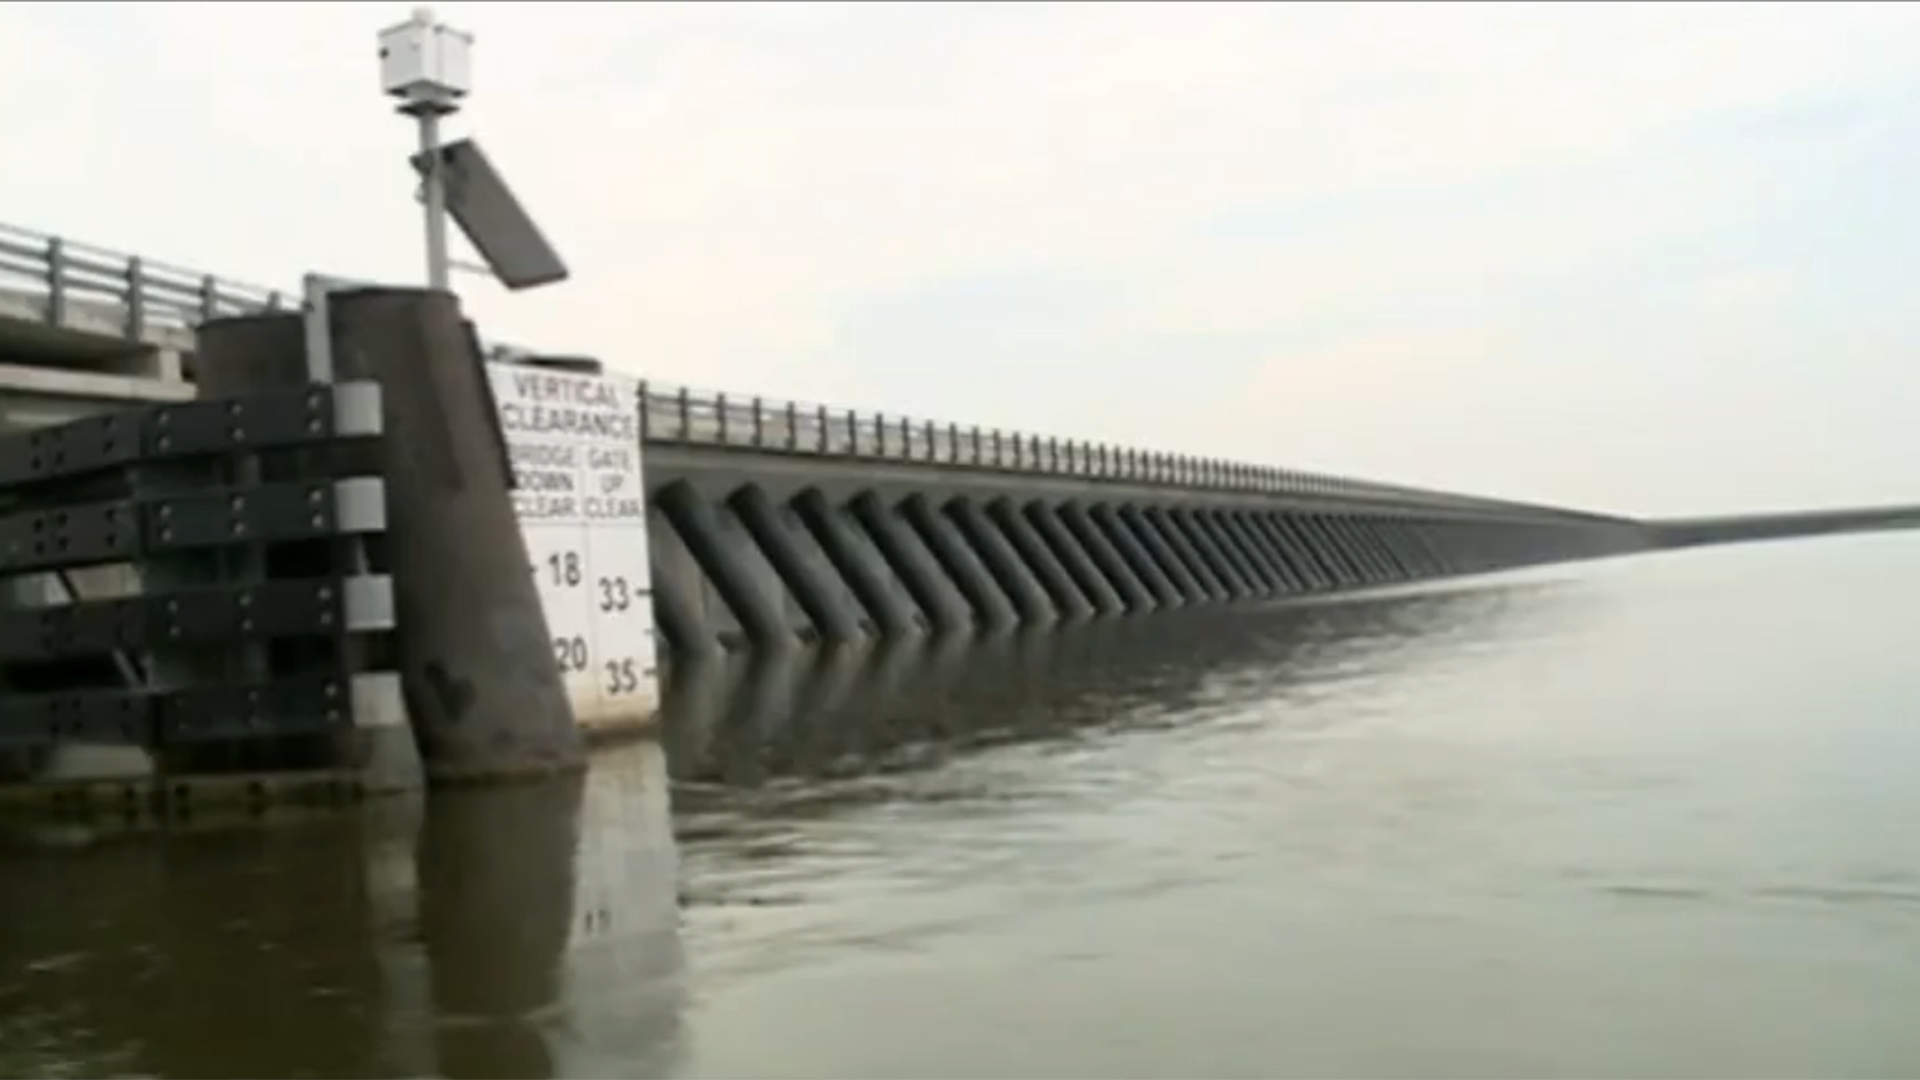 Costly improvements to Louisiana's levee system were put in place ...